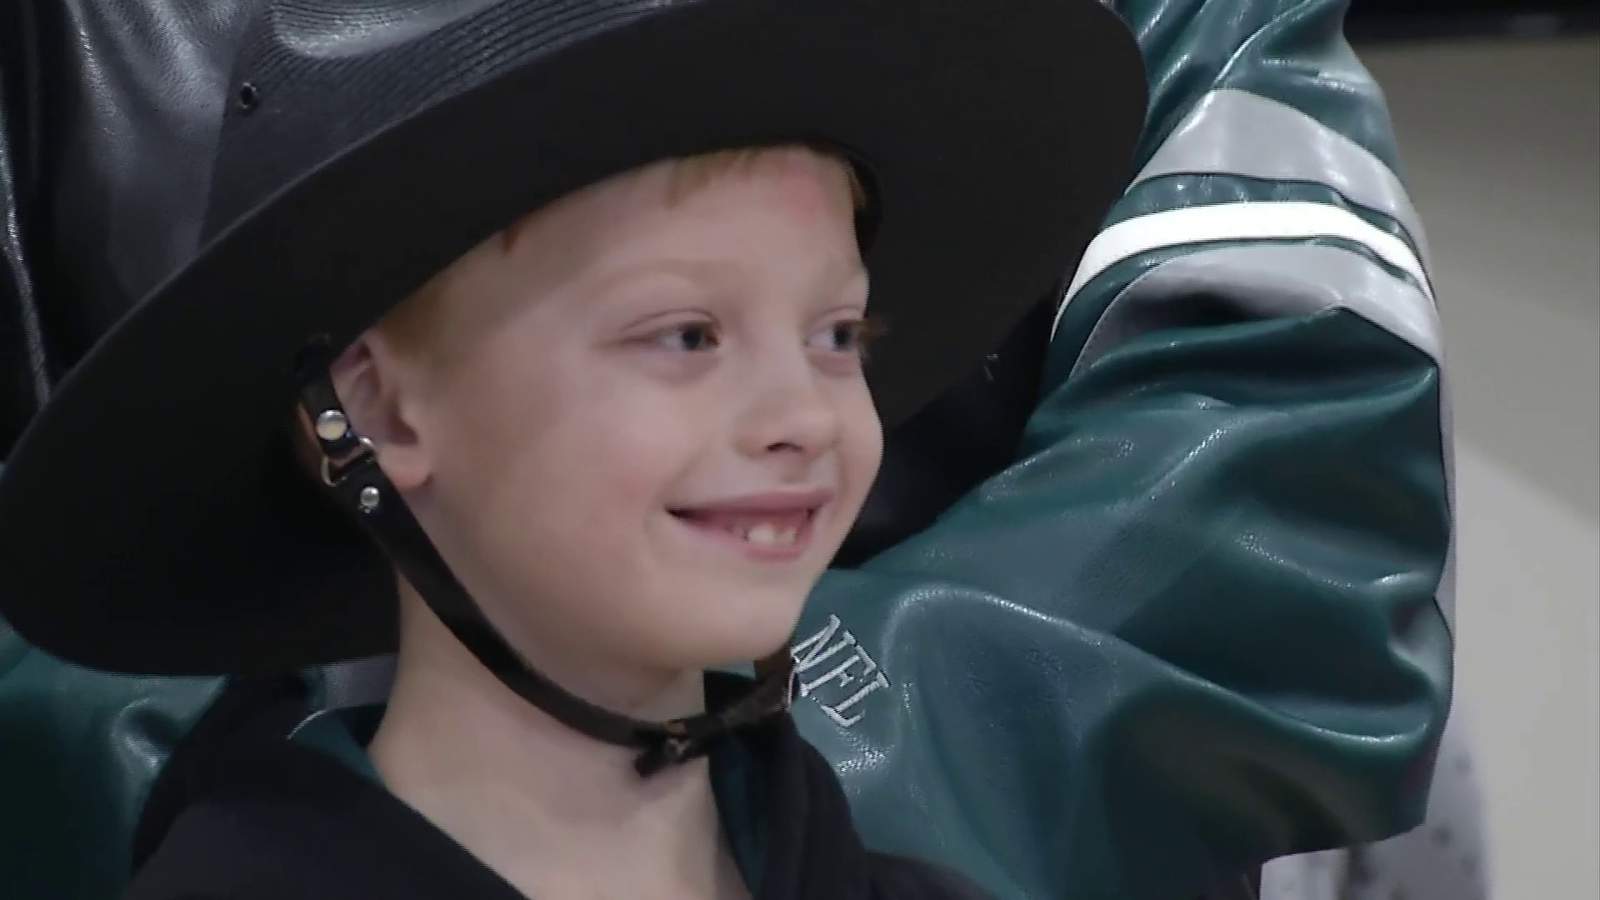 A birthday to remember: Buchanan boy goes from empty birthday party to receiving surprise from NFL team